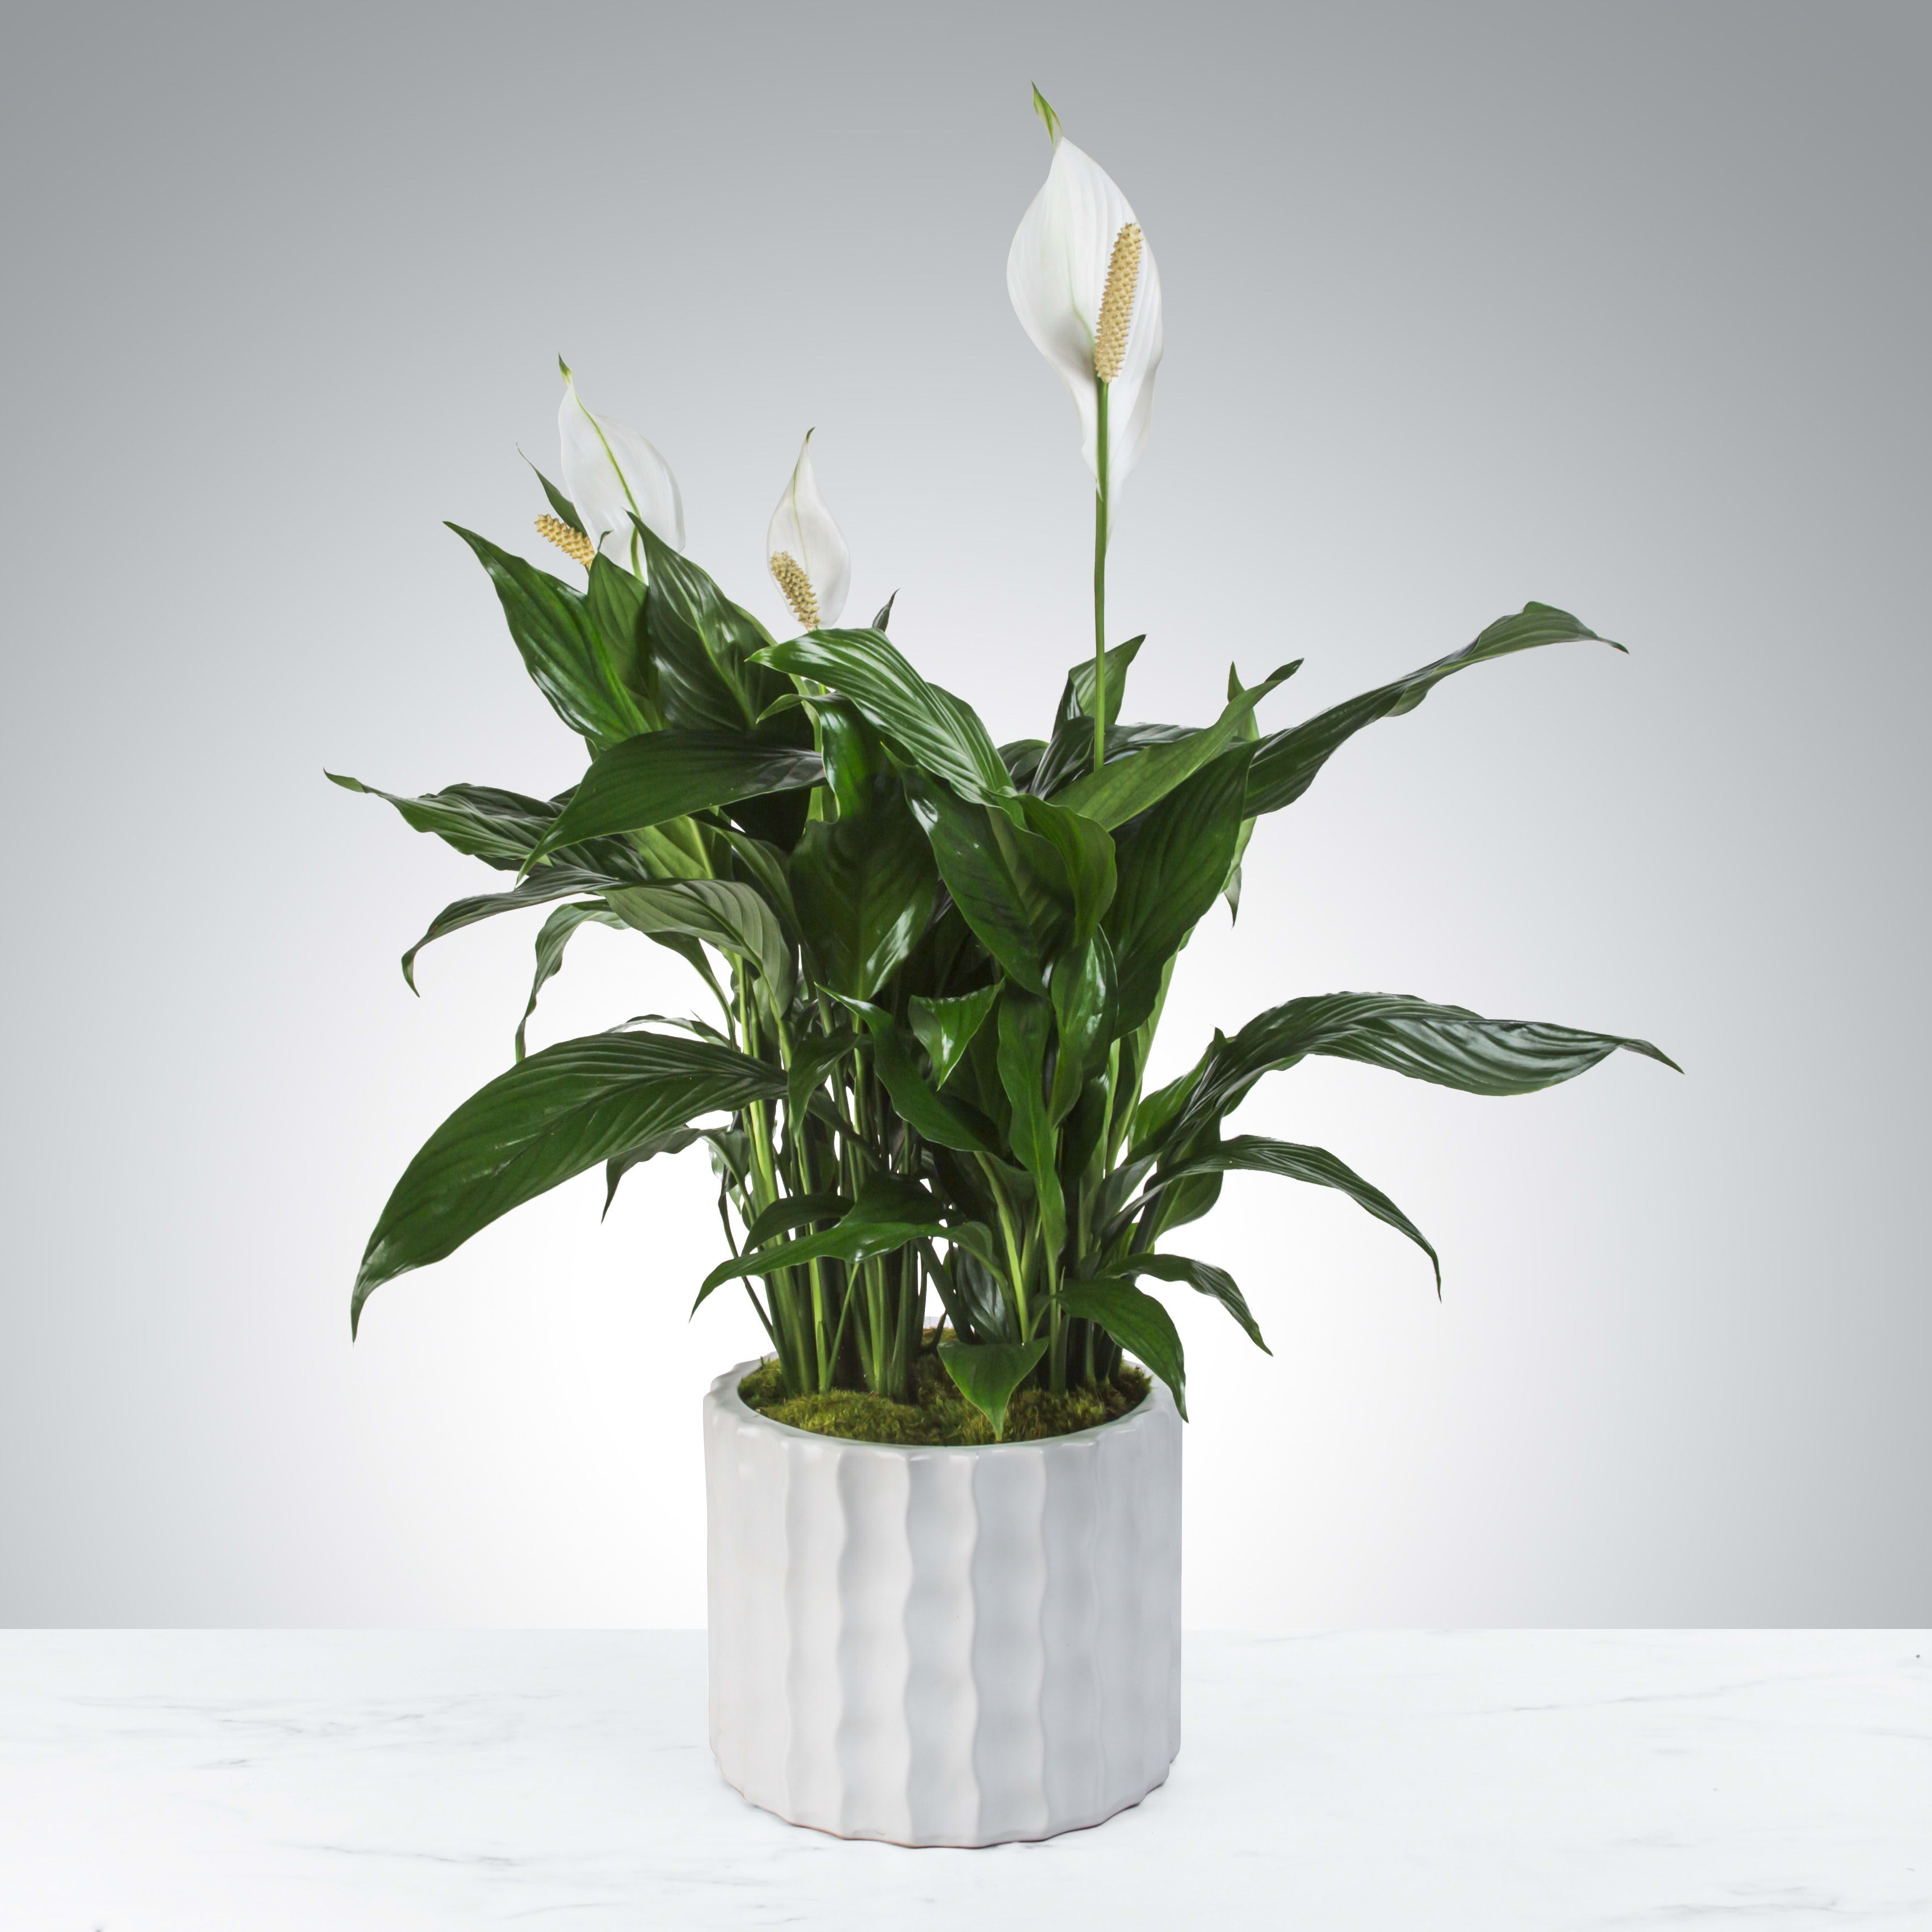 Modern Spathiphyllum Plant by BloomNation™ - A tall reaching spathiphyllum plant, also known as a peace lily, set in a modern planter. Peace Lily's are easy to grow and are known for their air toxin removing properties. Send the gift of greenery!  (6&quot; pot)